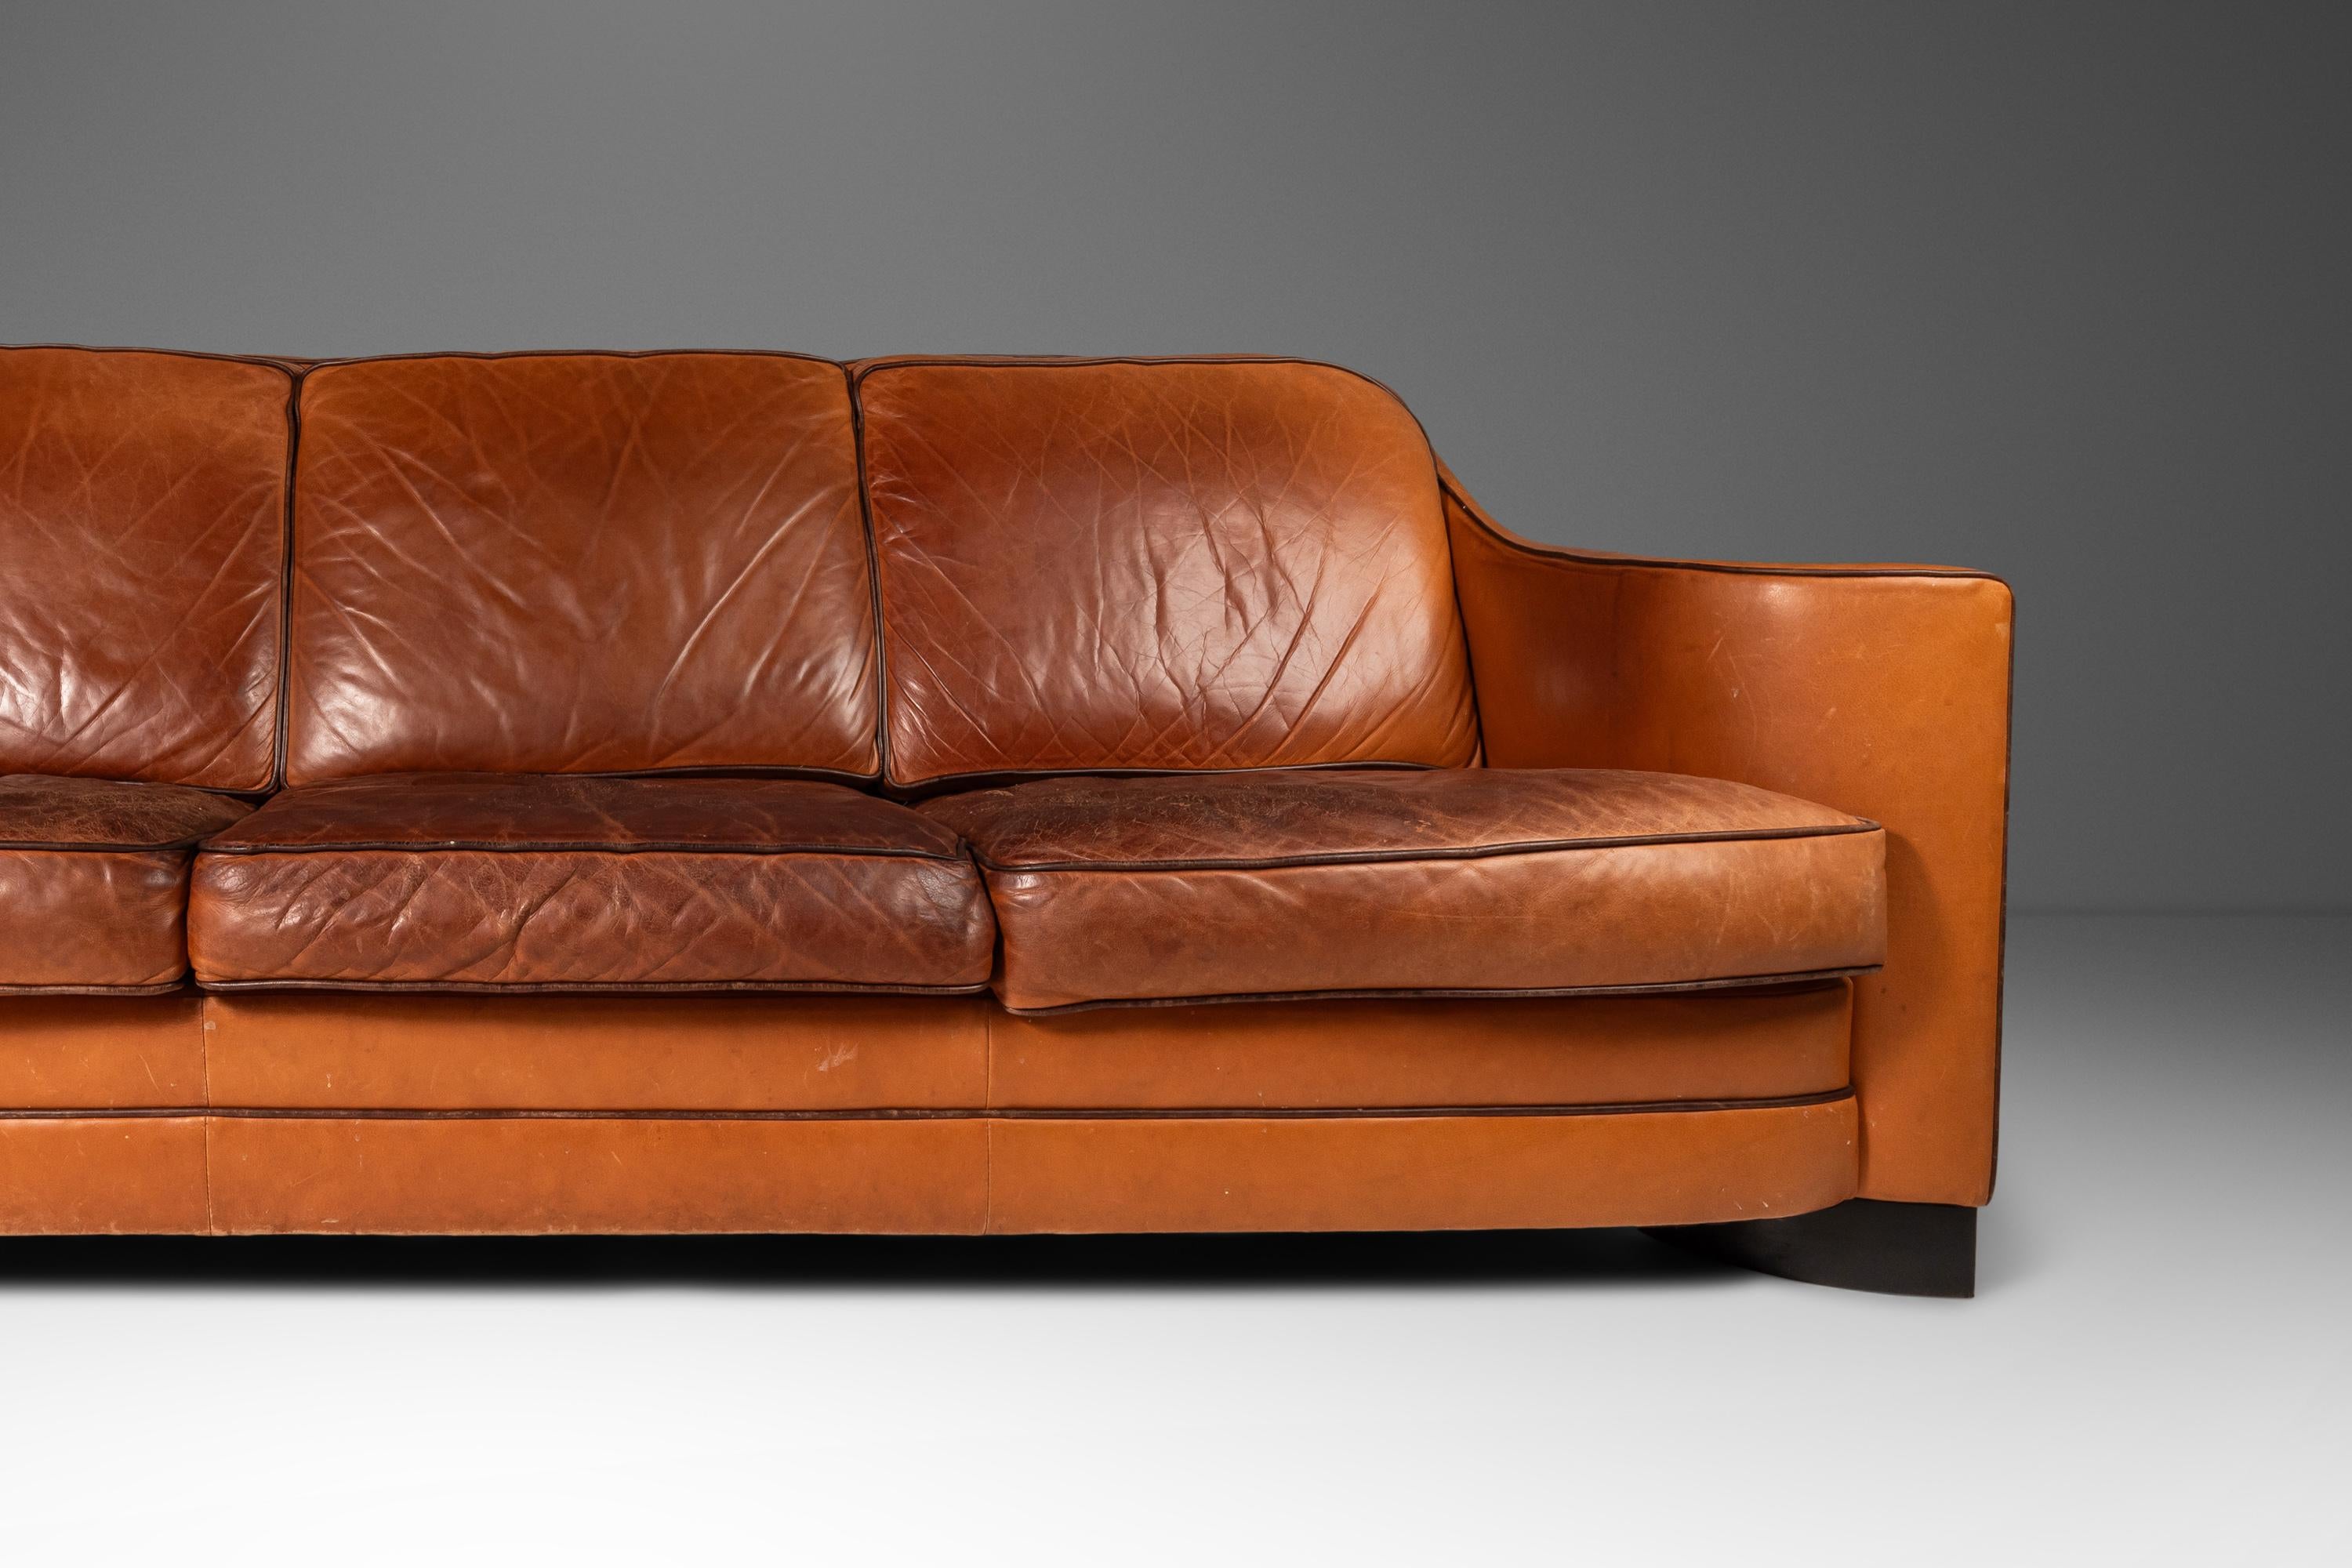 Art Deco Style Three-Seater Sofa with Sculptural Arms in Patinaed Leather, 1970s For Sale 4